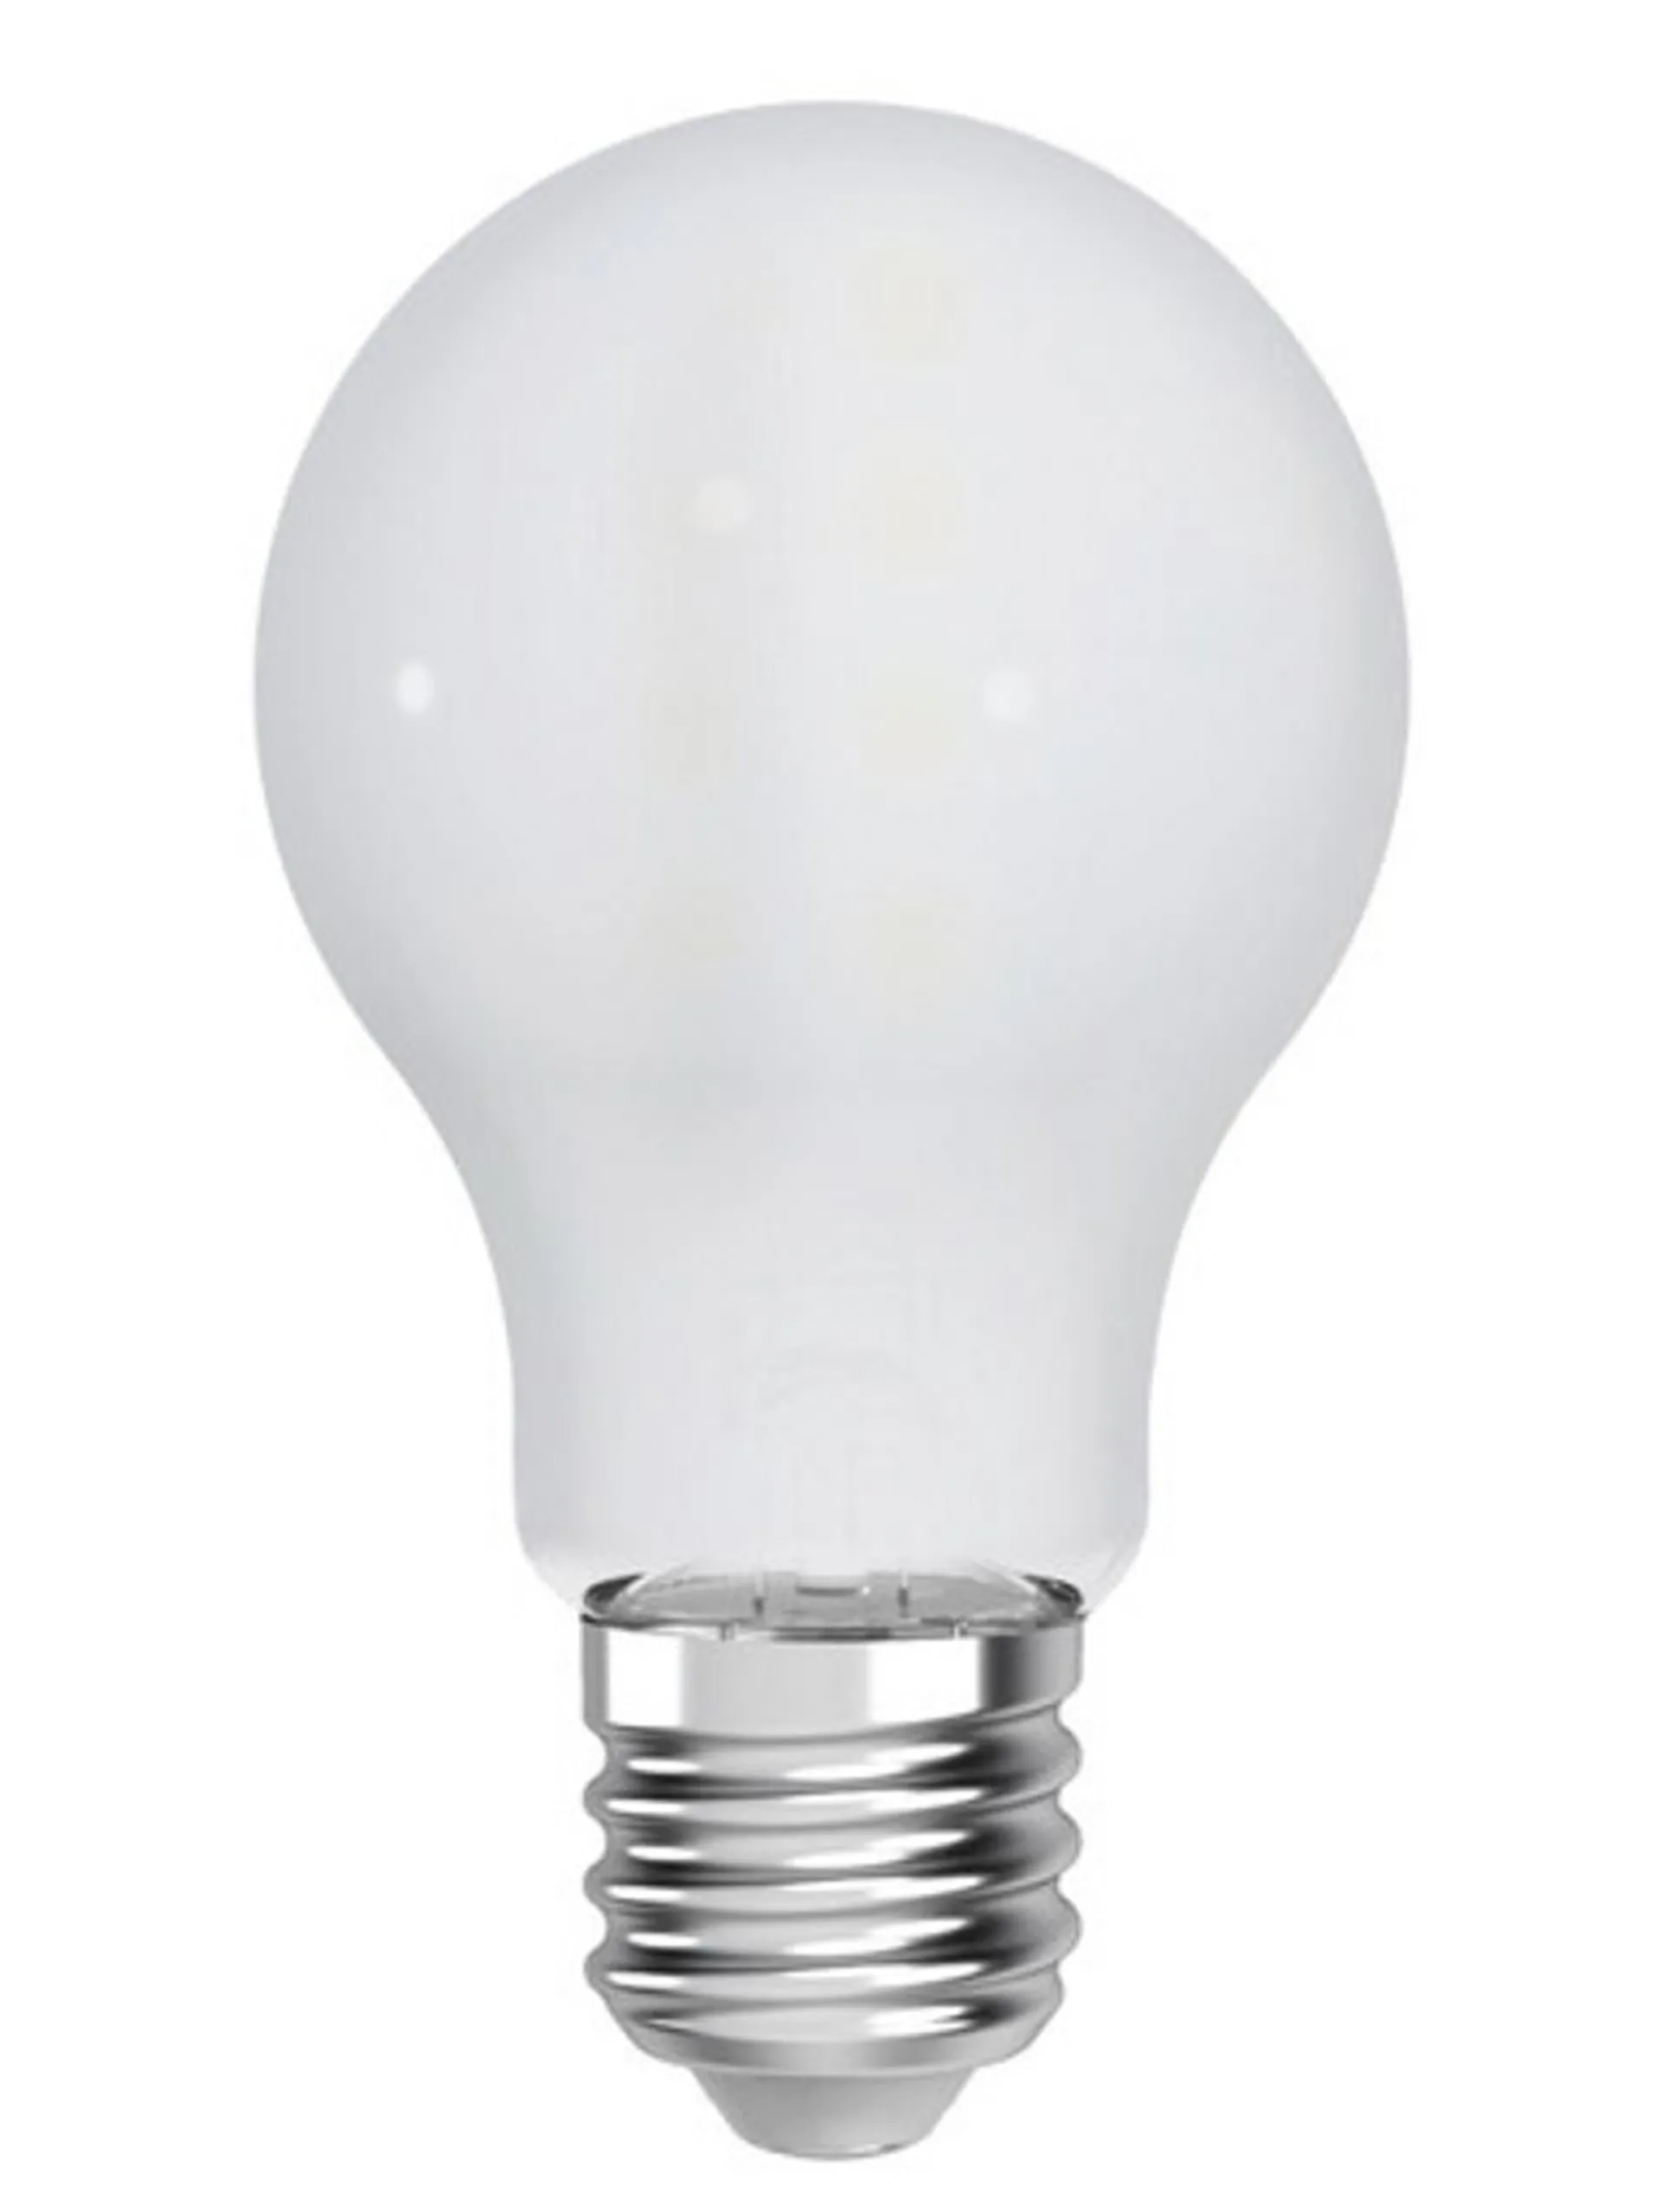 LED AG A60 ES 10W 1500lm Cool White Dimmable